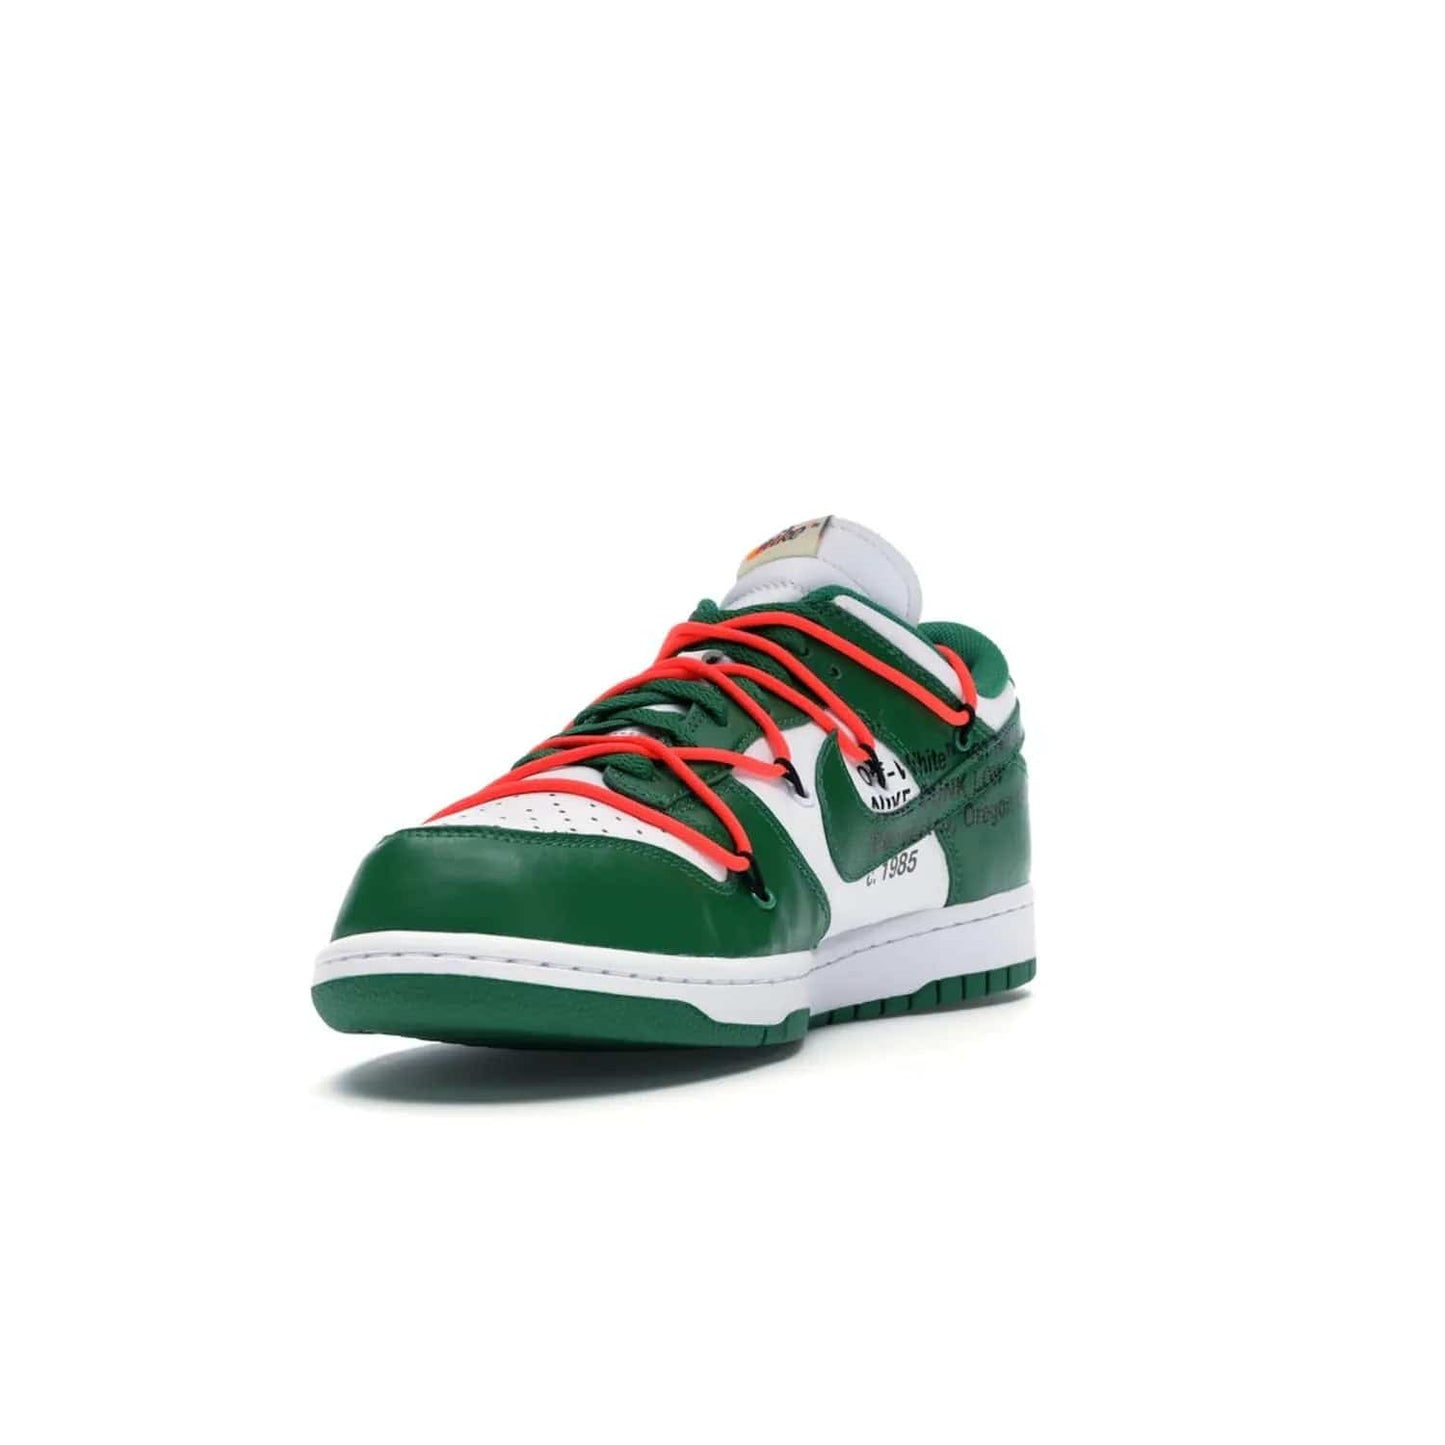 Nike Dunk Low Off-White Pine Green - Image 13 - Only at www.BallersClubKickz.com - The Nike Dunk Low Off-White Pine Green combines classic 1980s style with modern-day design. Featuring white leather uppers and pine green overlays, these classic kicks feature secondary lacing system, zip-ties and signature Off-White text. Releasing in December 2019, these shoes are a timeless classic for any wardrobe.